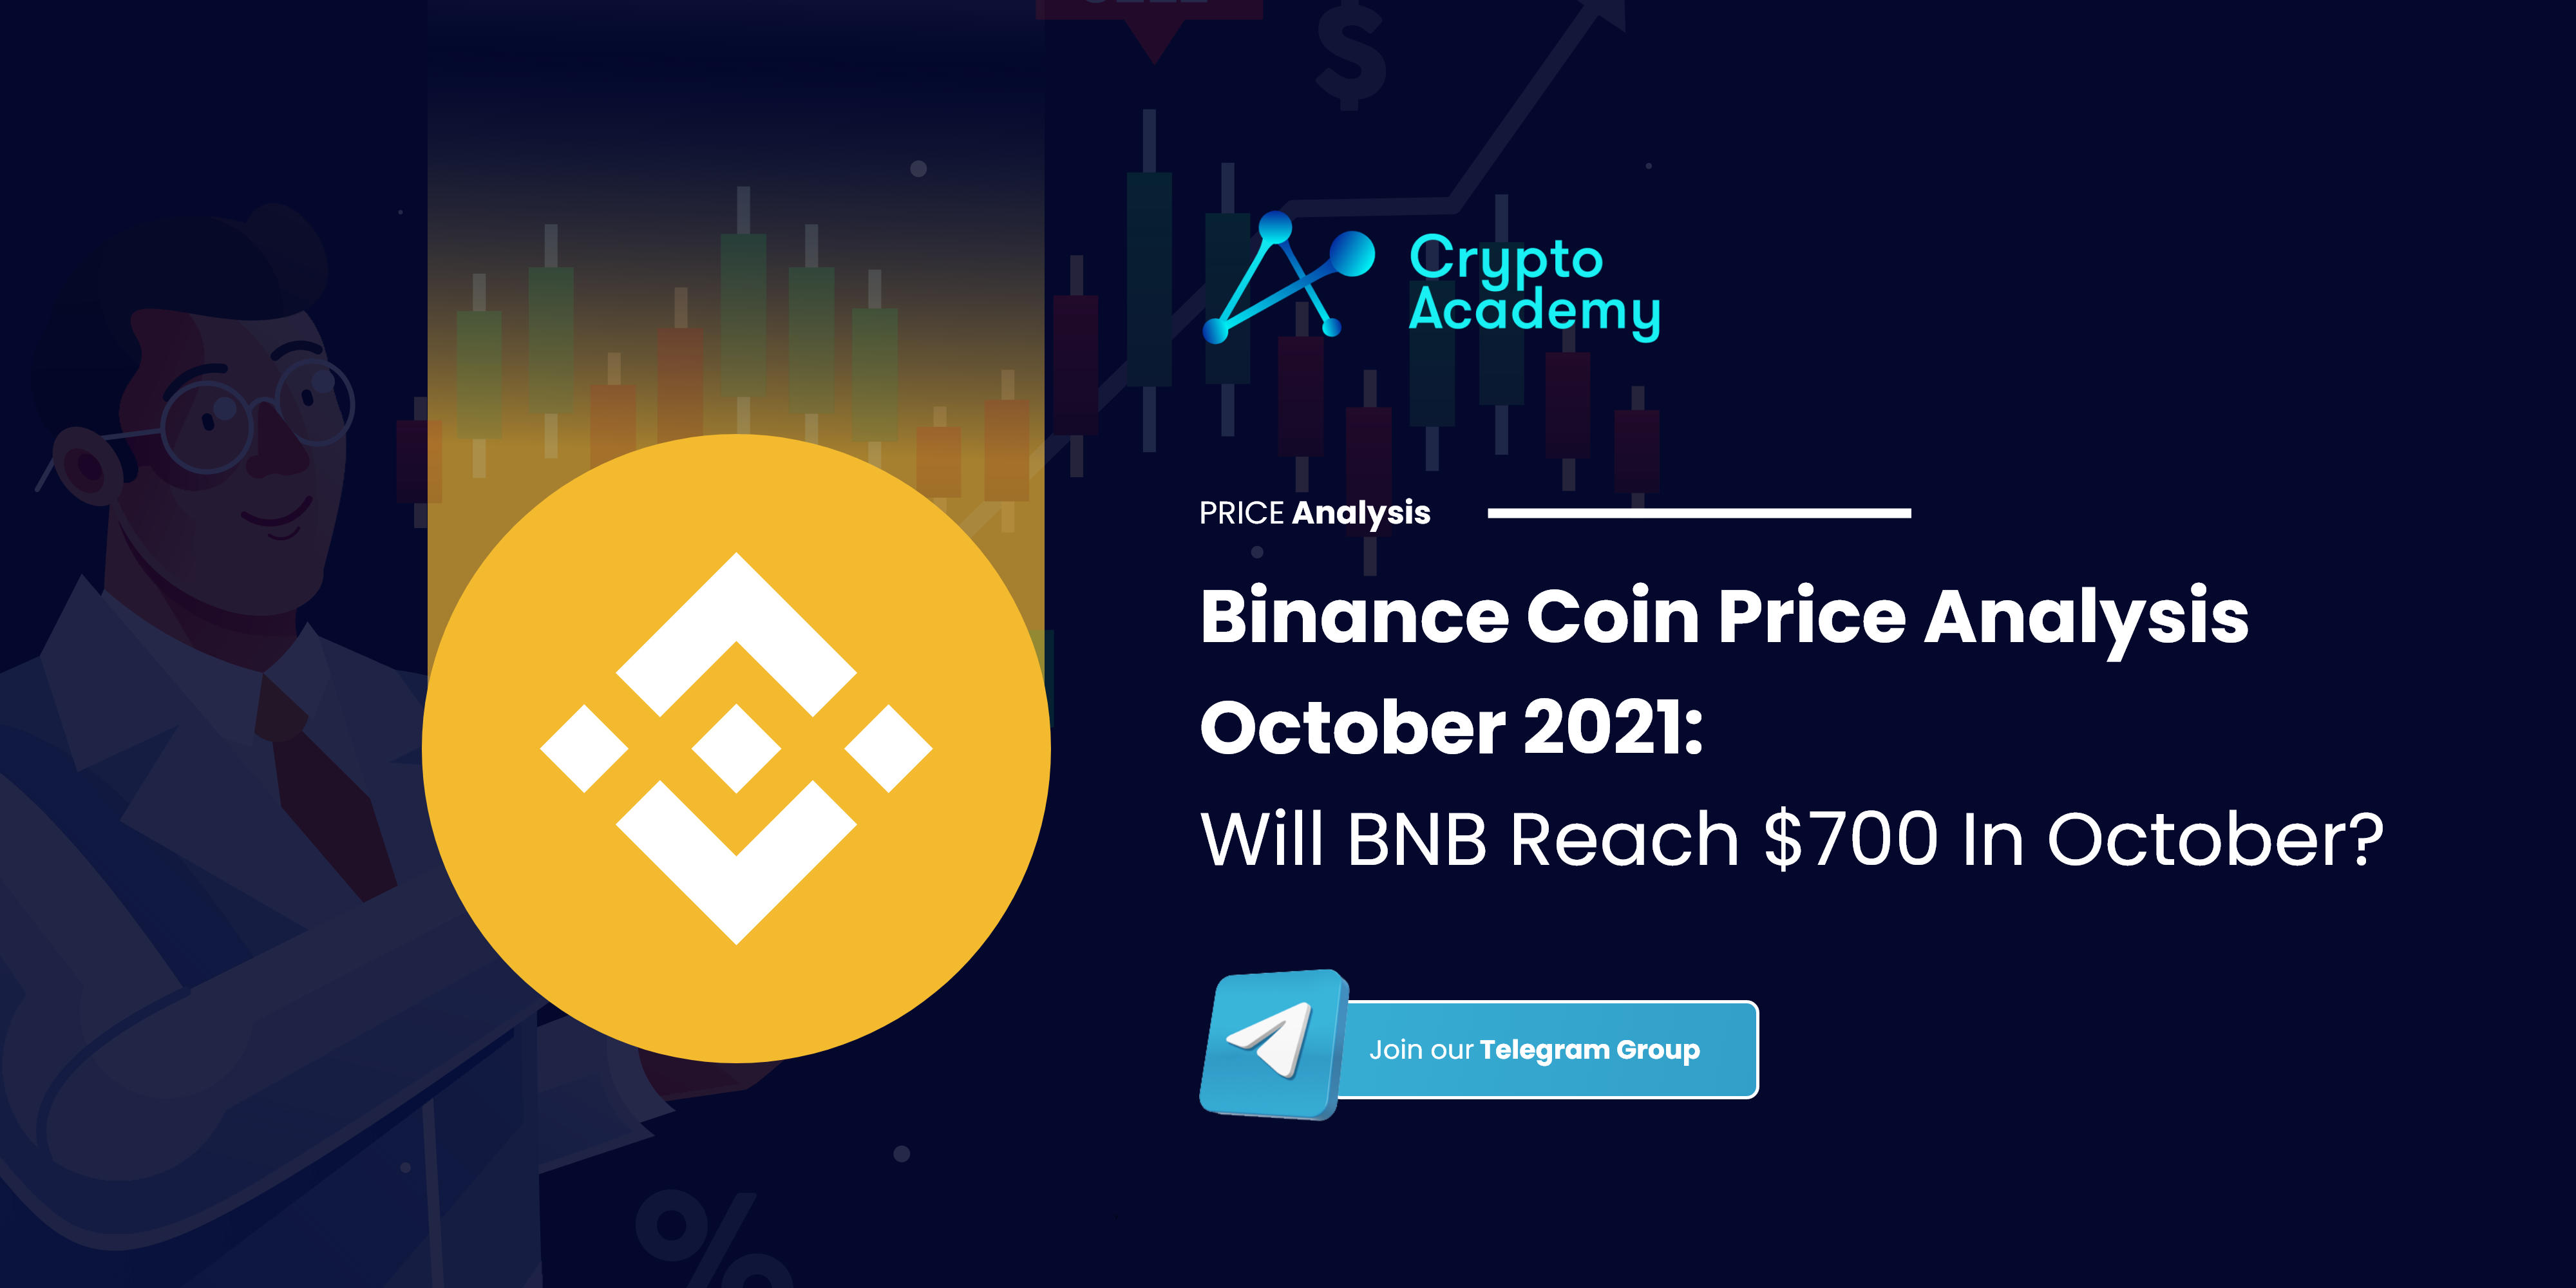 Binance Coin Price Analysis October 2021: Will BNB Reach $700 In October?